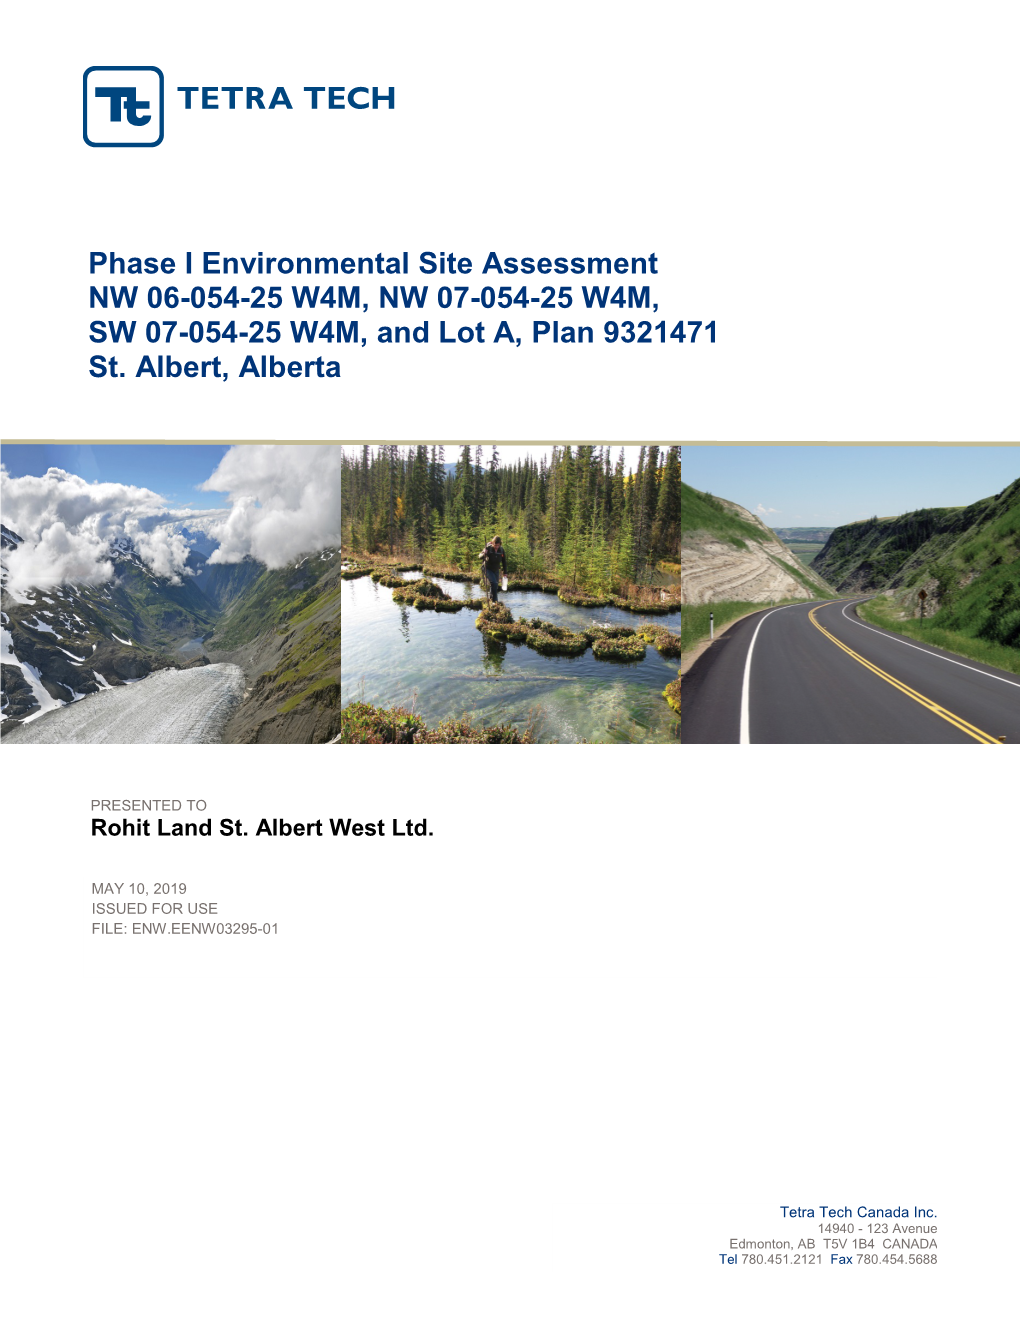 Phase I Environmental Site Assessment NW 06-054-25 W4M, NW 07-054-25 W4M, SW 07-054-25 W4M, and Lot A, Plan 9321471 St